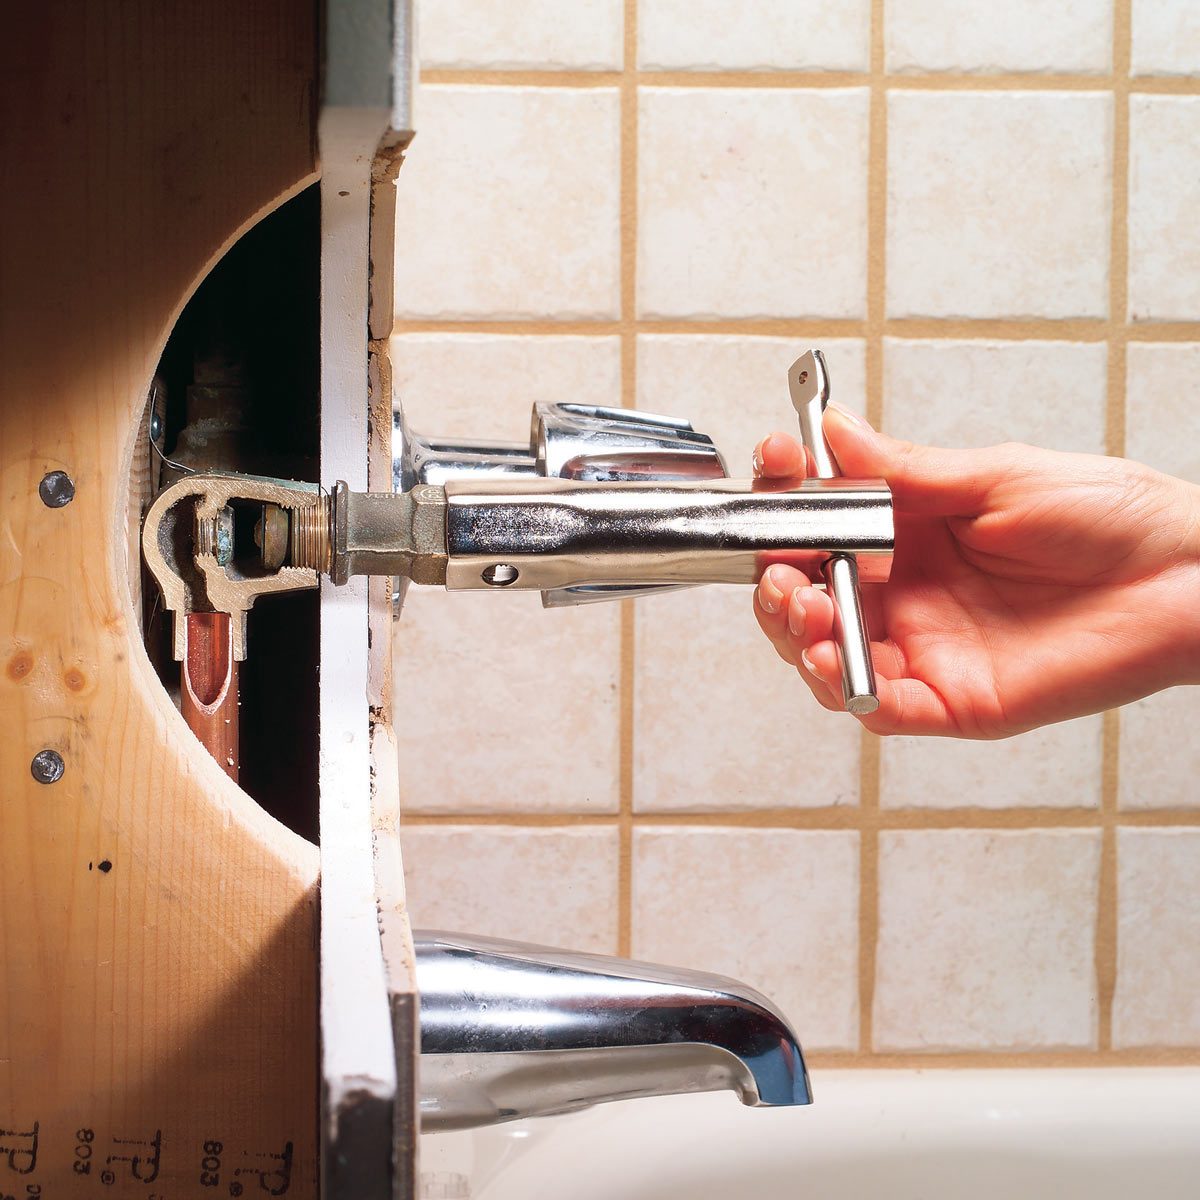 plumbing - Can you leave hot & cold water mixer open and control